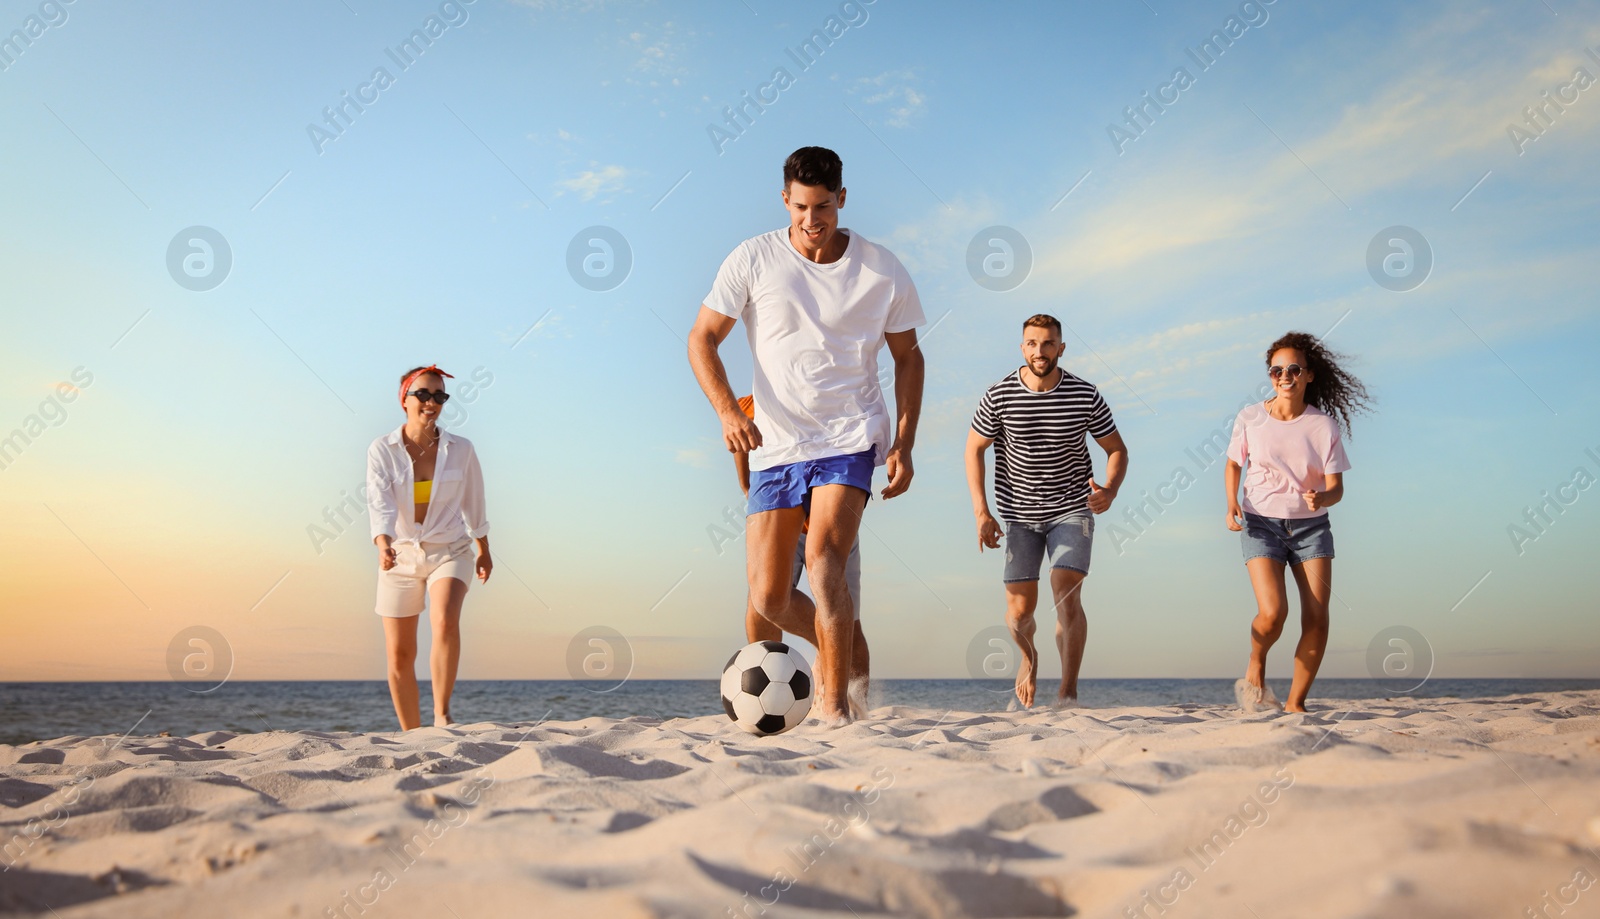 Image of Happy friends playing football on beach during sunset, low angle view